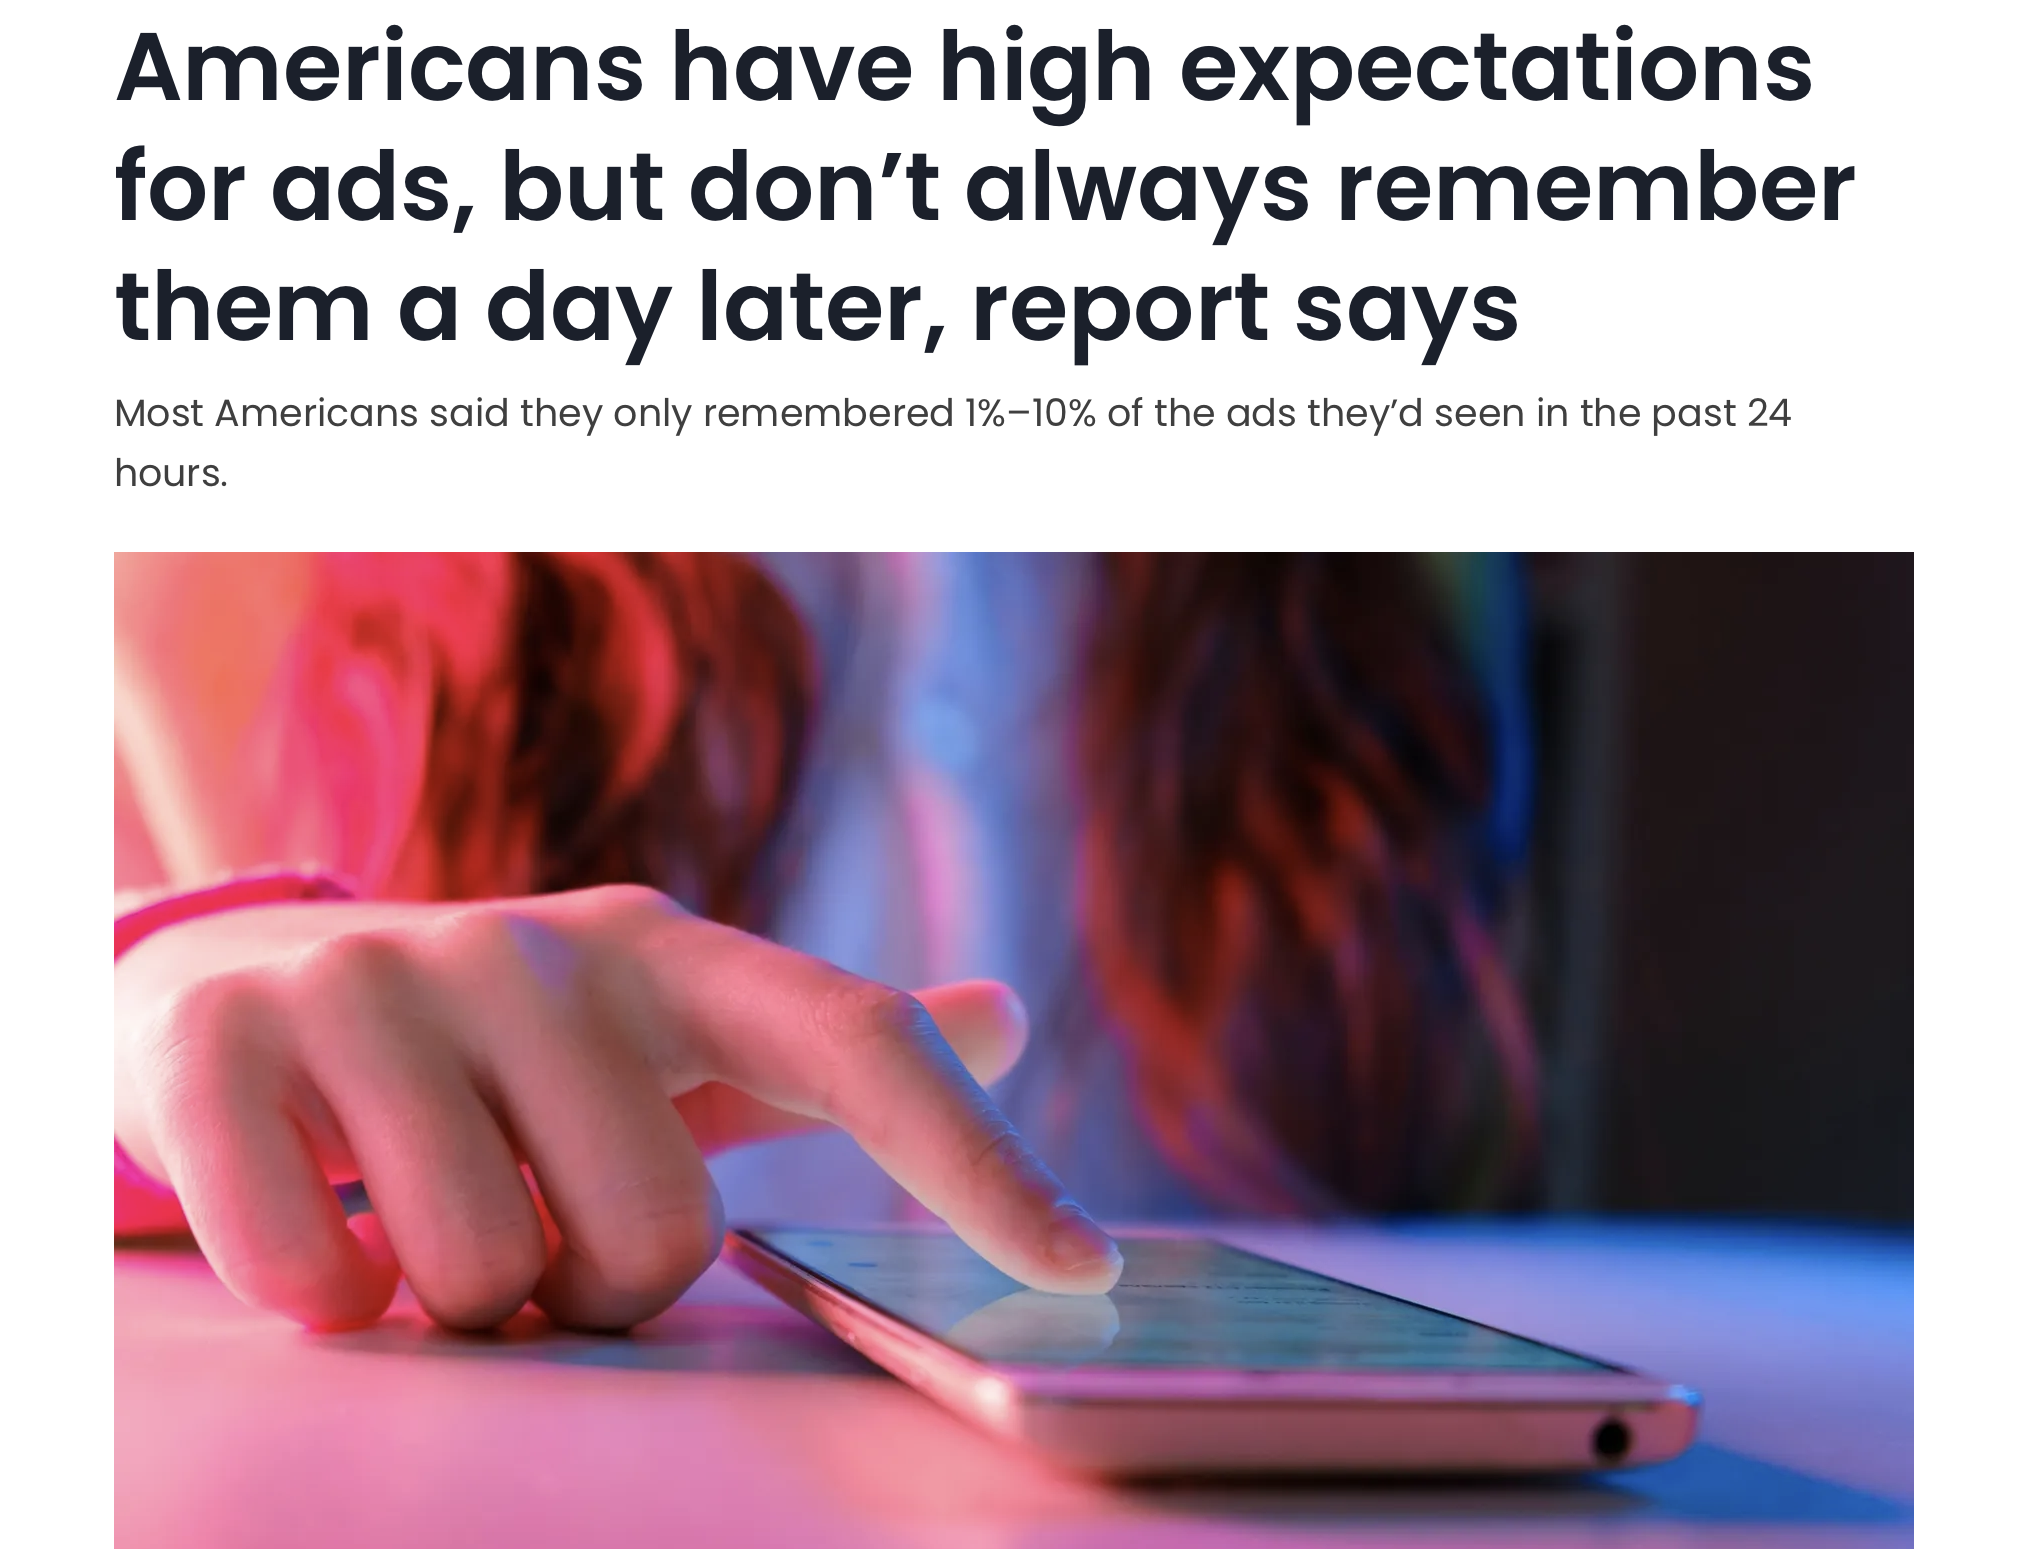 Americans have high expectations for ads, but don’t always remember them a day later, report says